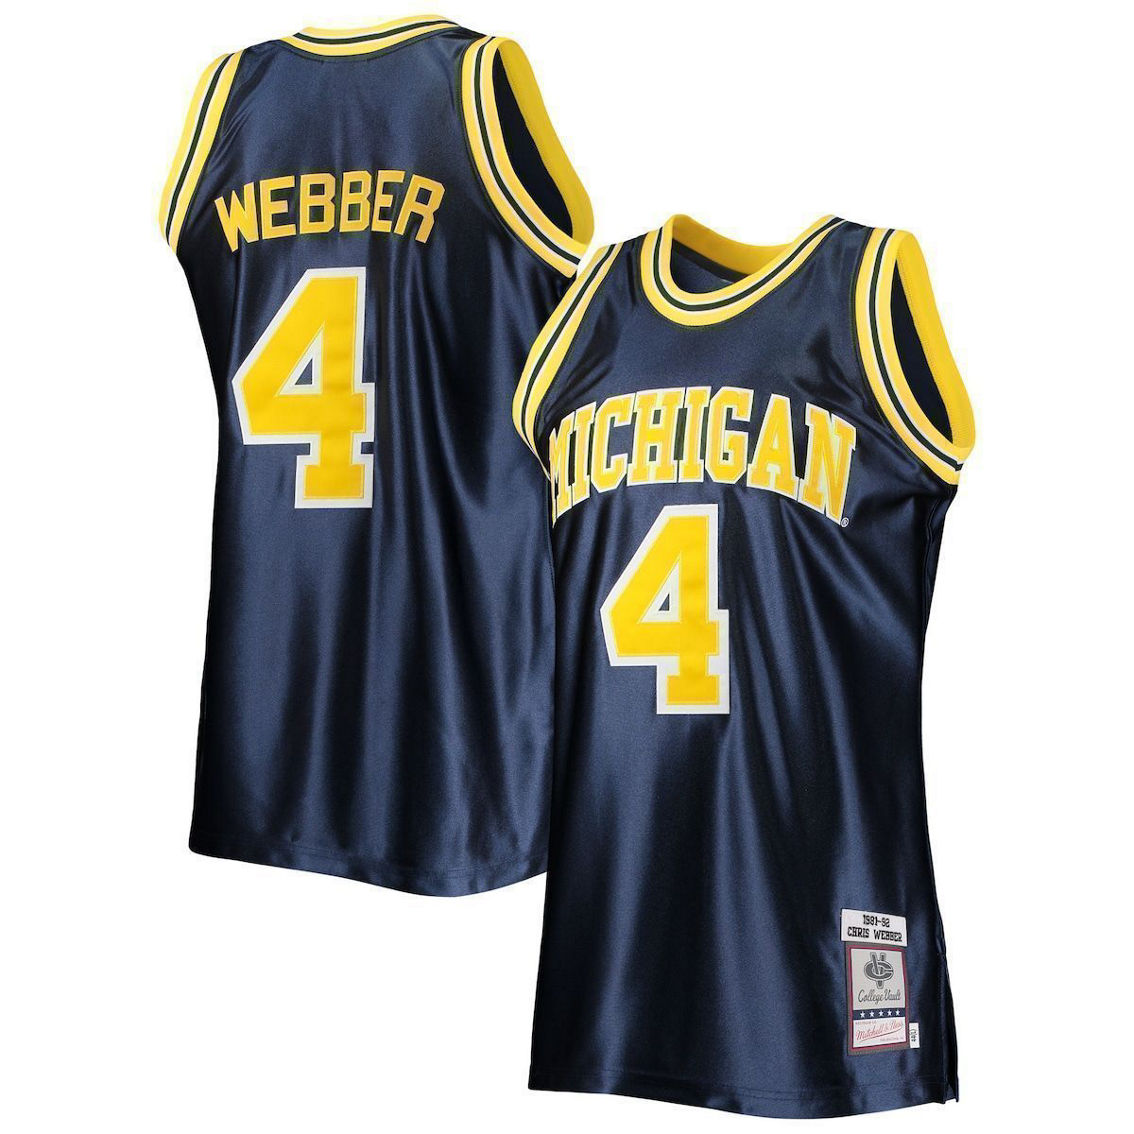 Mitchell & Ness Men's Chris Webber Navy Michigan Wolverines 1991/92 Authentic Throwback College Jersey - Image 2 of 4